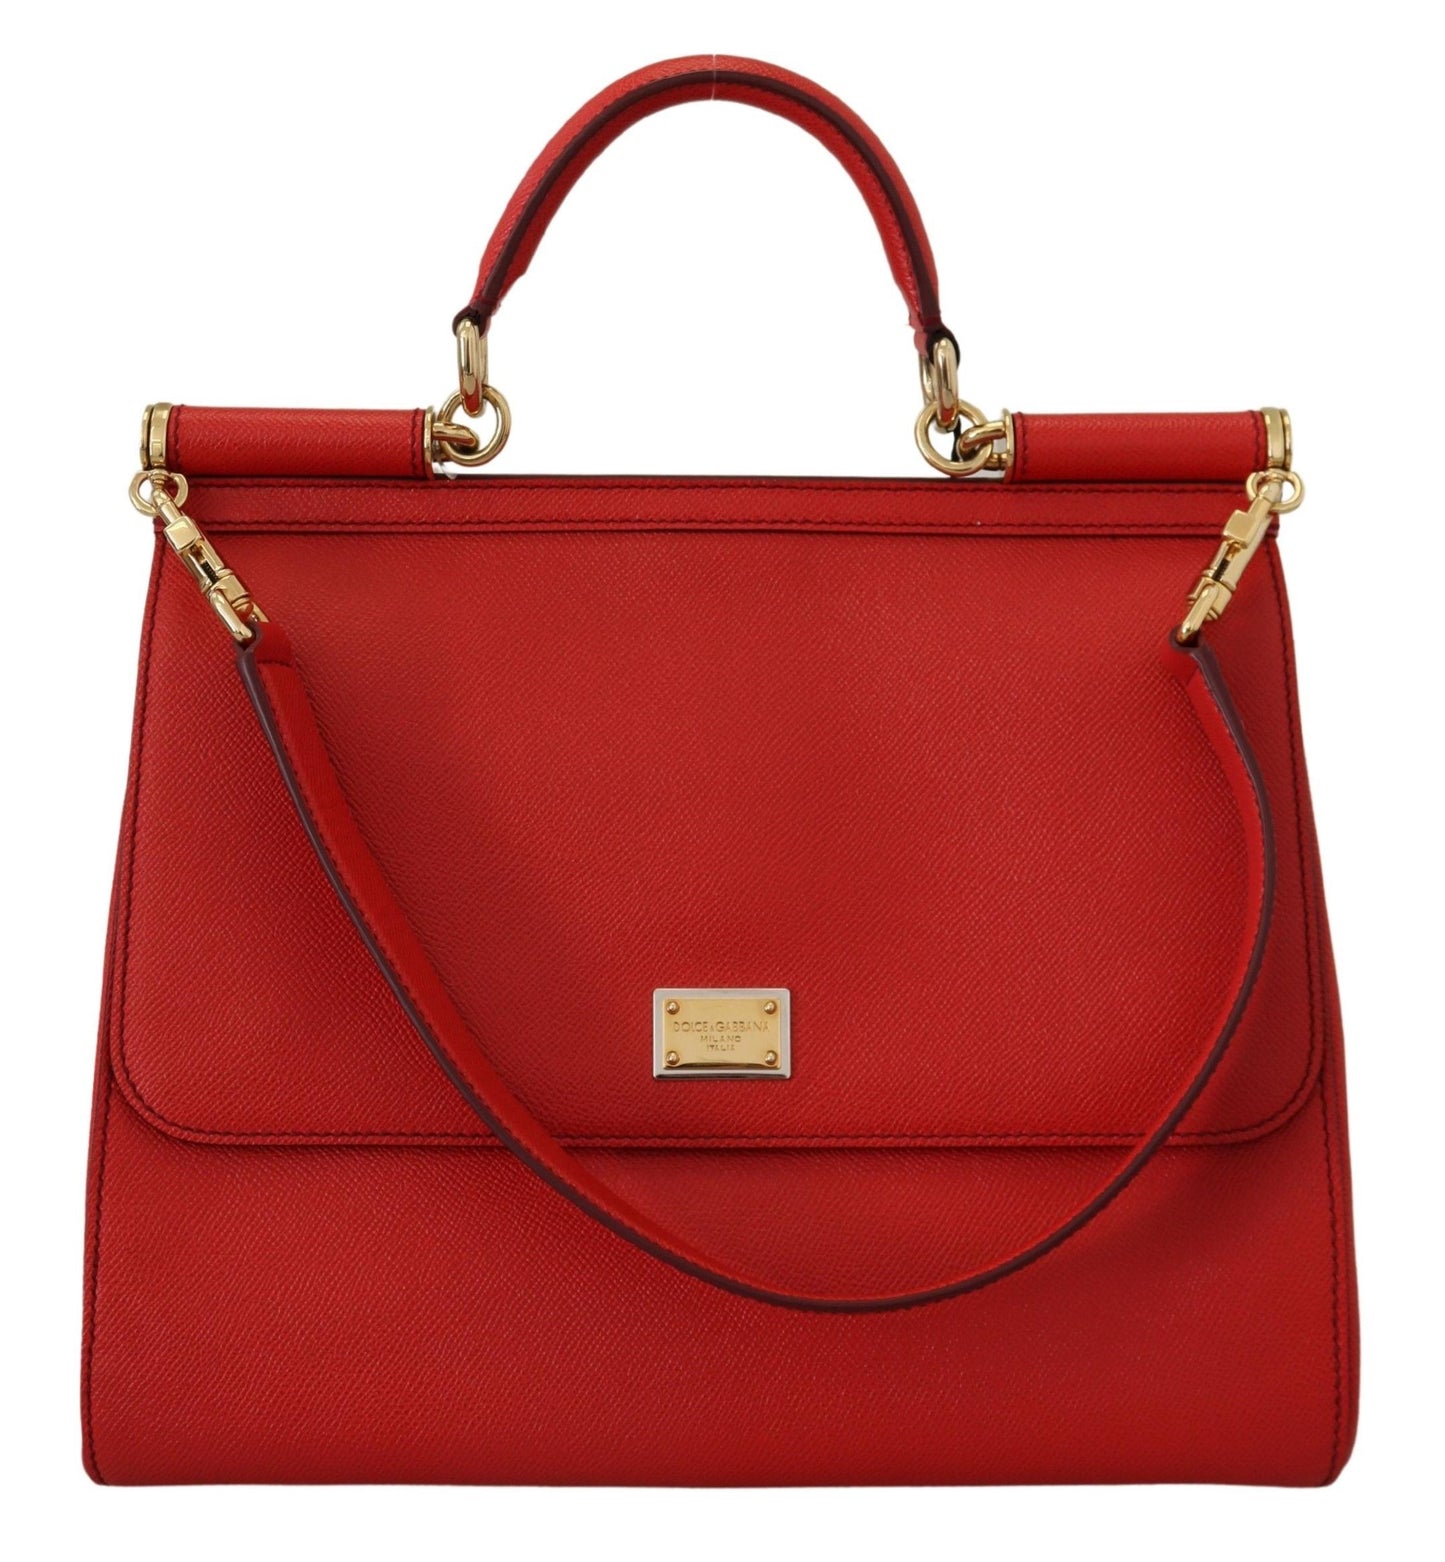 Sicily Bag in Red Leather with Gold Accents